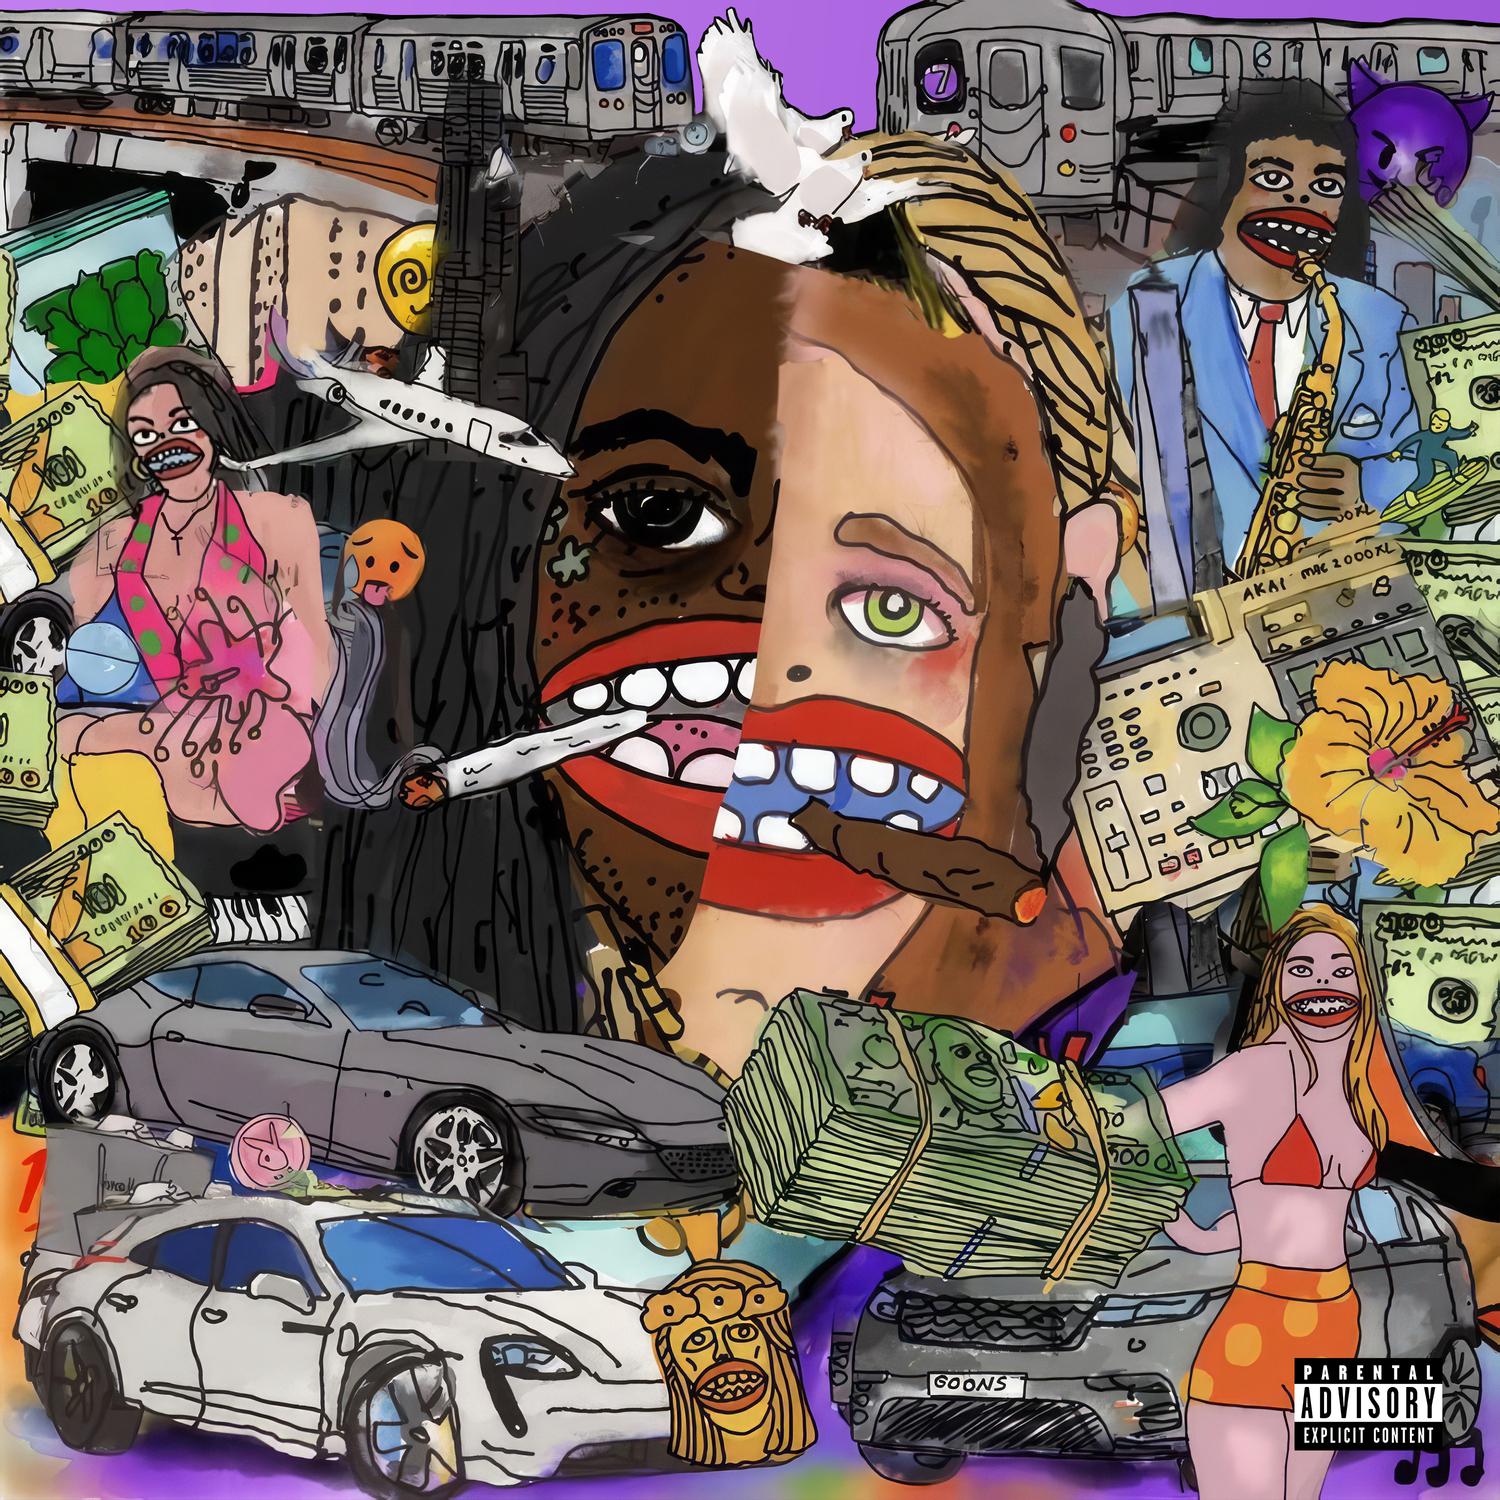 Valee - About That (feat. 03 Greedo)